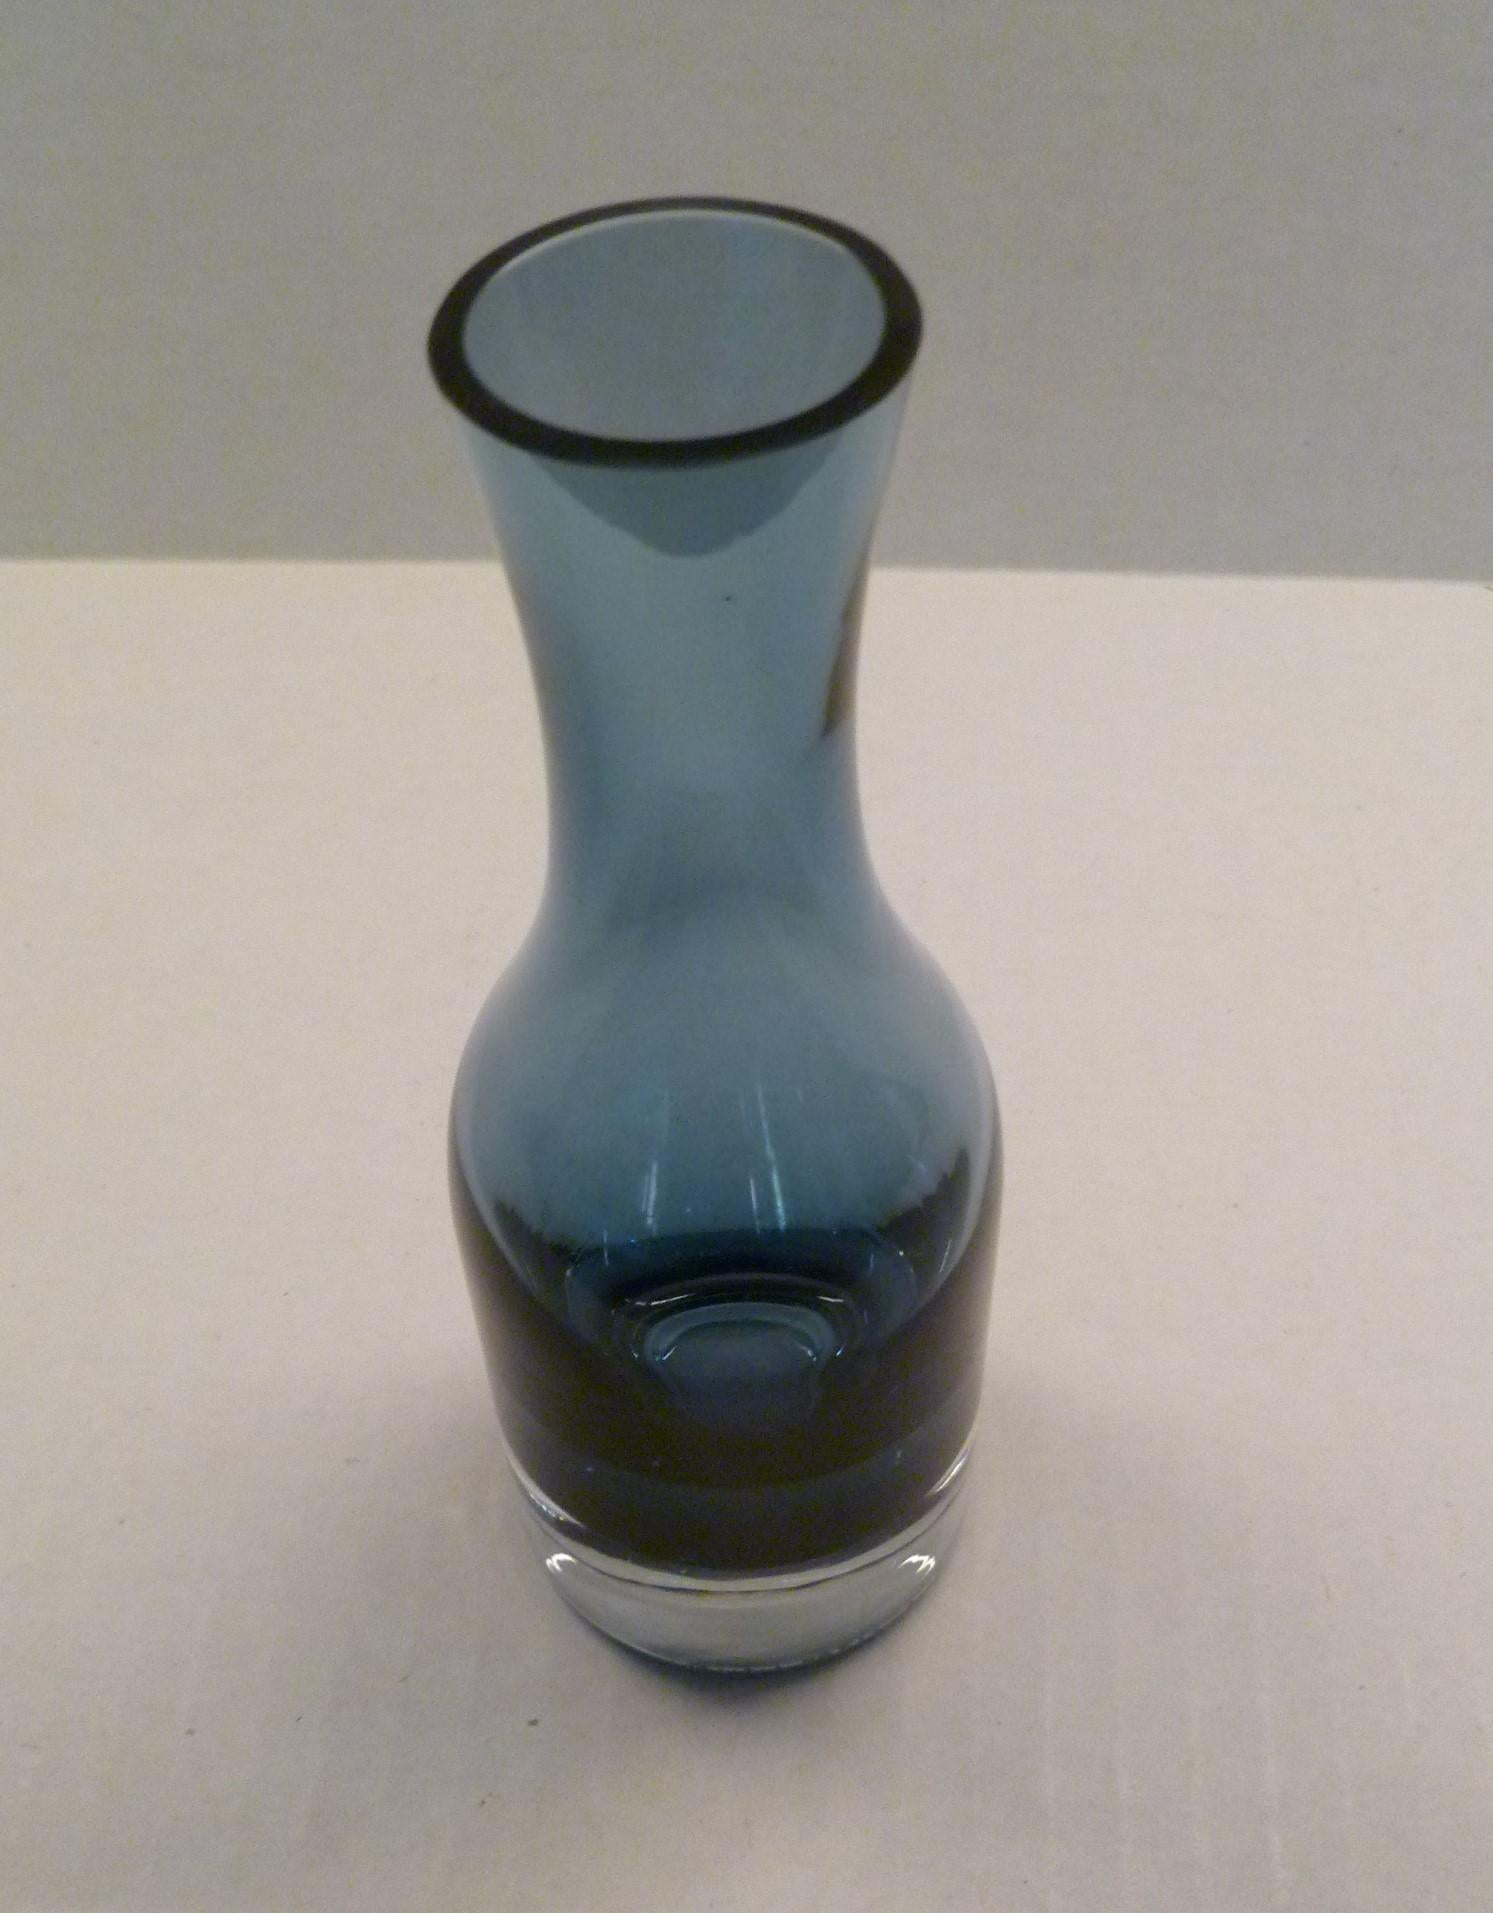 Mid-Century Modern blown glass vase from the Riihimaki glass factory in Finland from 1951.  Small size with a heavy clear vase with a beautiful smoke-blue colored body.

Riihimäki was founded in 1910 and became the largest glass factory in Finland